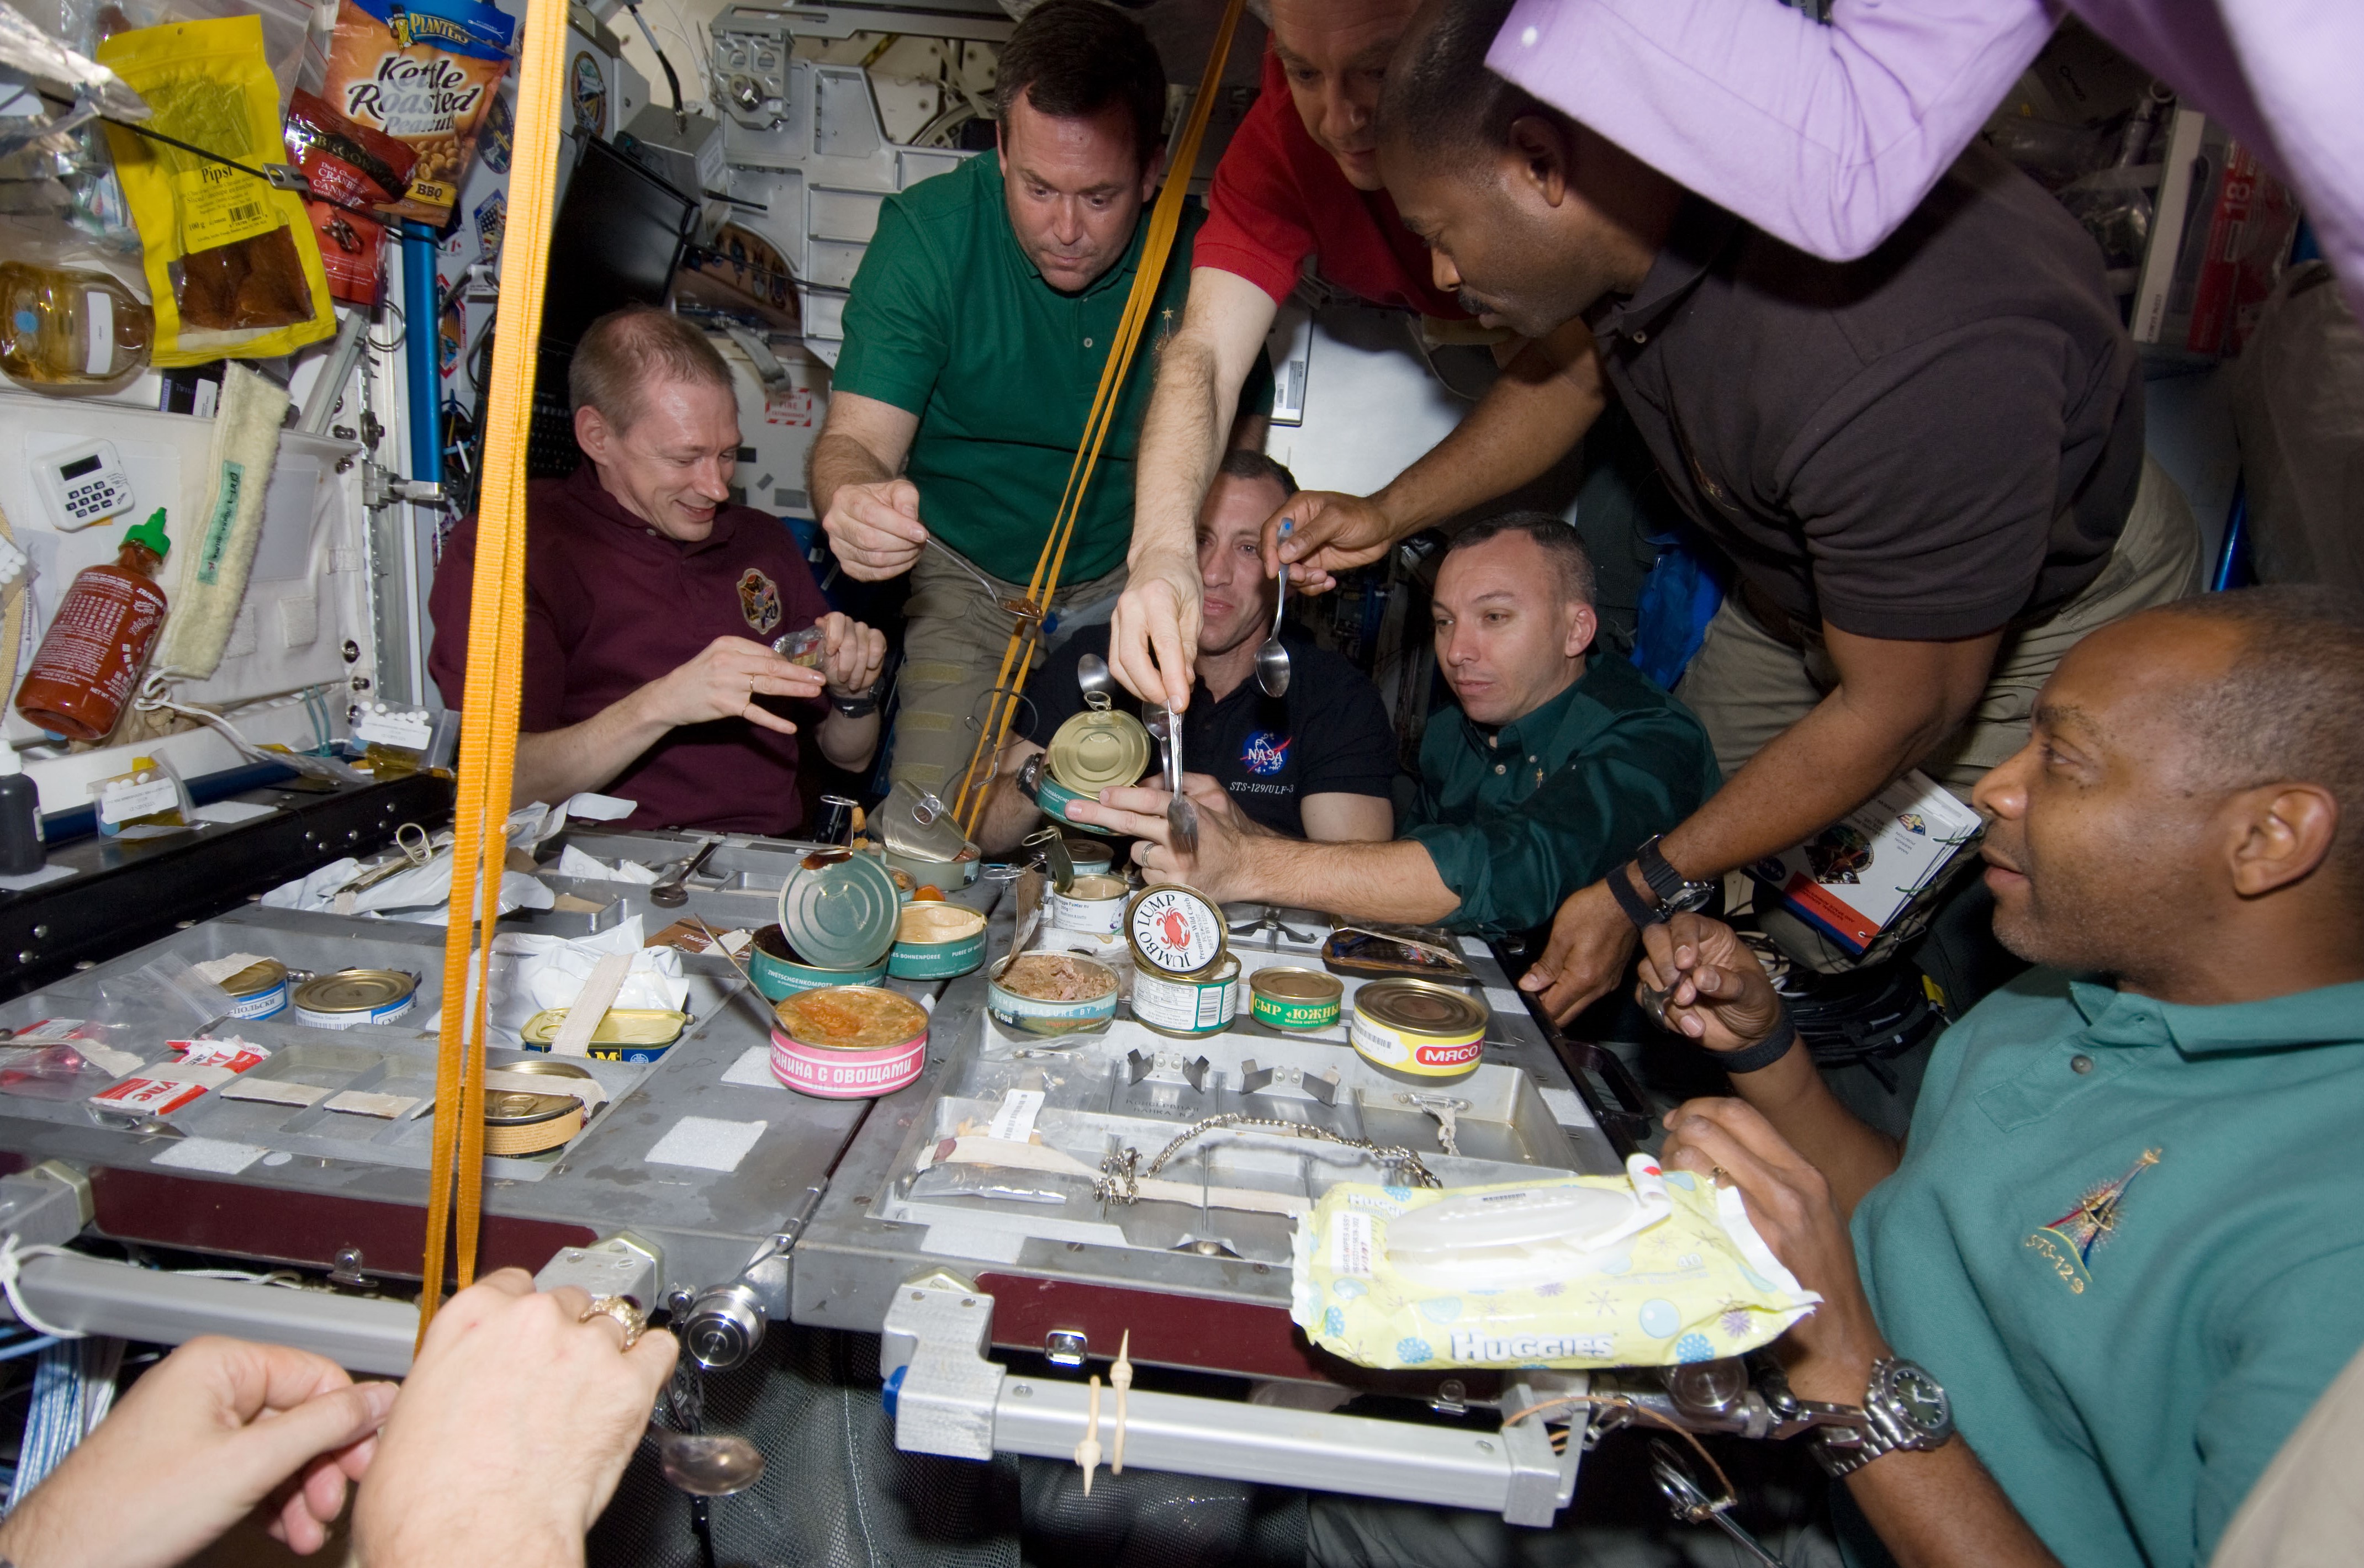 Crew members from Expedition 21 and STS-129 share an early Thanksgiving meal